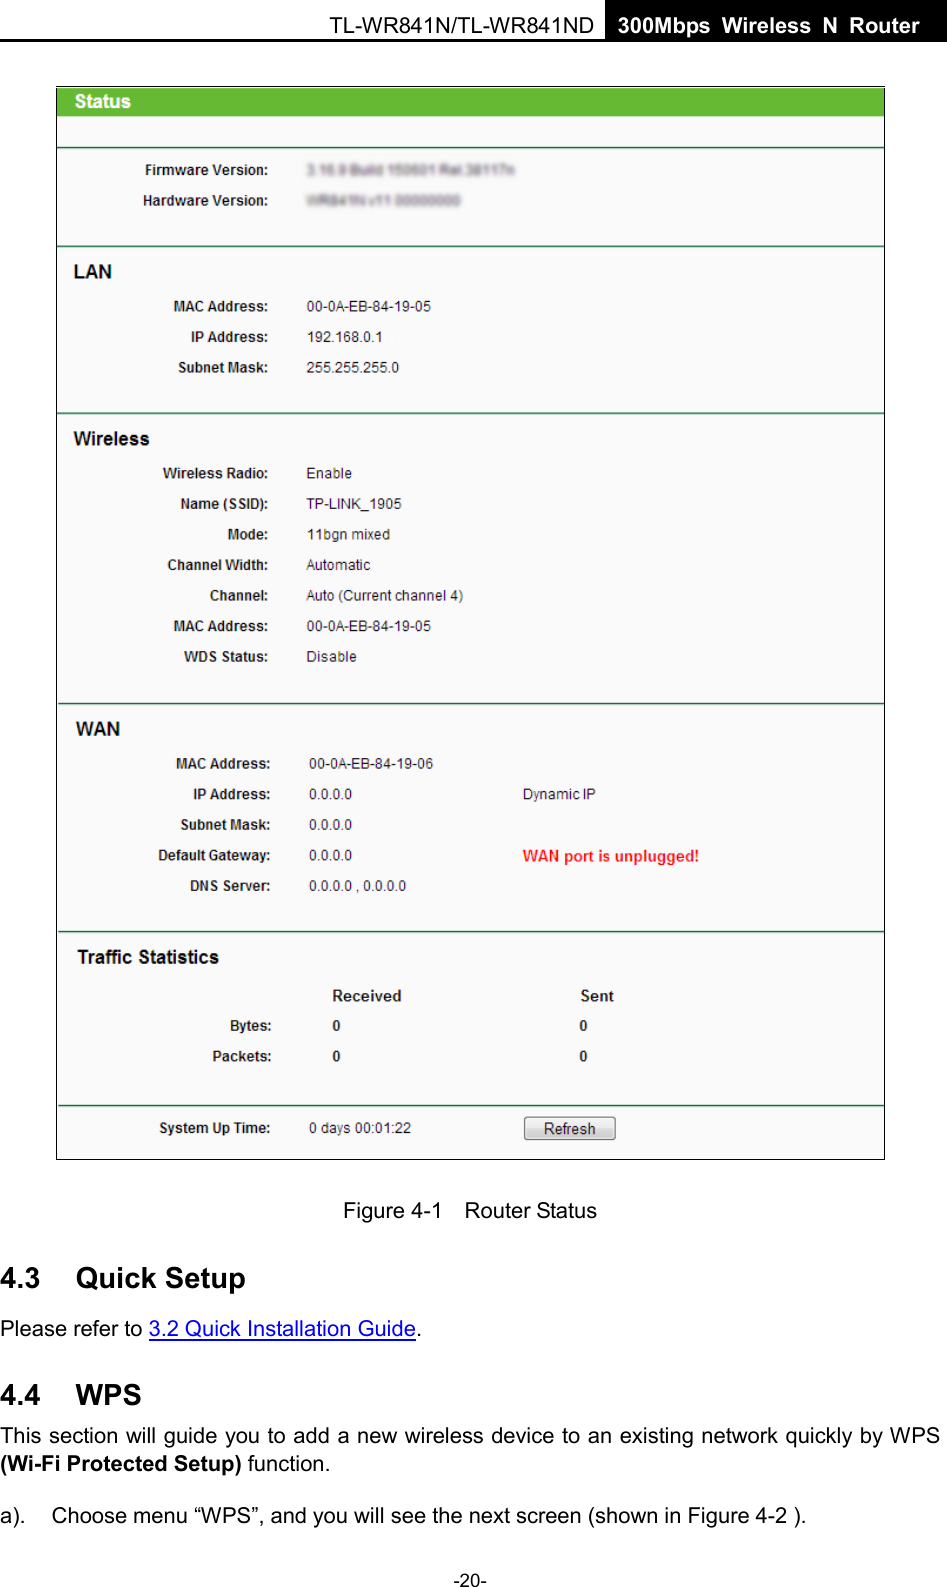 TL-WR841N/TL-WR841ND  300Mbps Wireless N Router Figure 4-1  Router Status 4.3 Quick Setup Please refer to 3.2 Quick Installation Guide. 4.4 WPS This section will guide you to add a new wireless device to an existing network quickly by WPS (Wi-Fi Protected Setup) function.   a). Choose menu “WPS”, and you will see the next screen (shown in Figure 4-2 ). -20- 